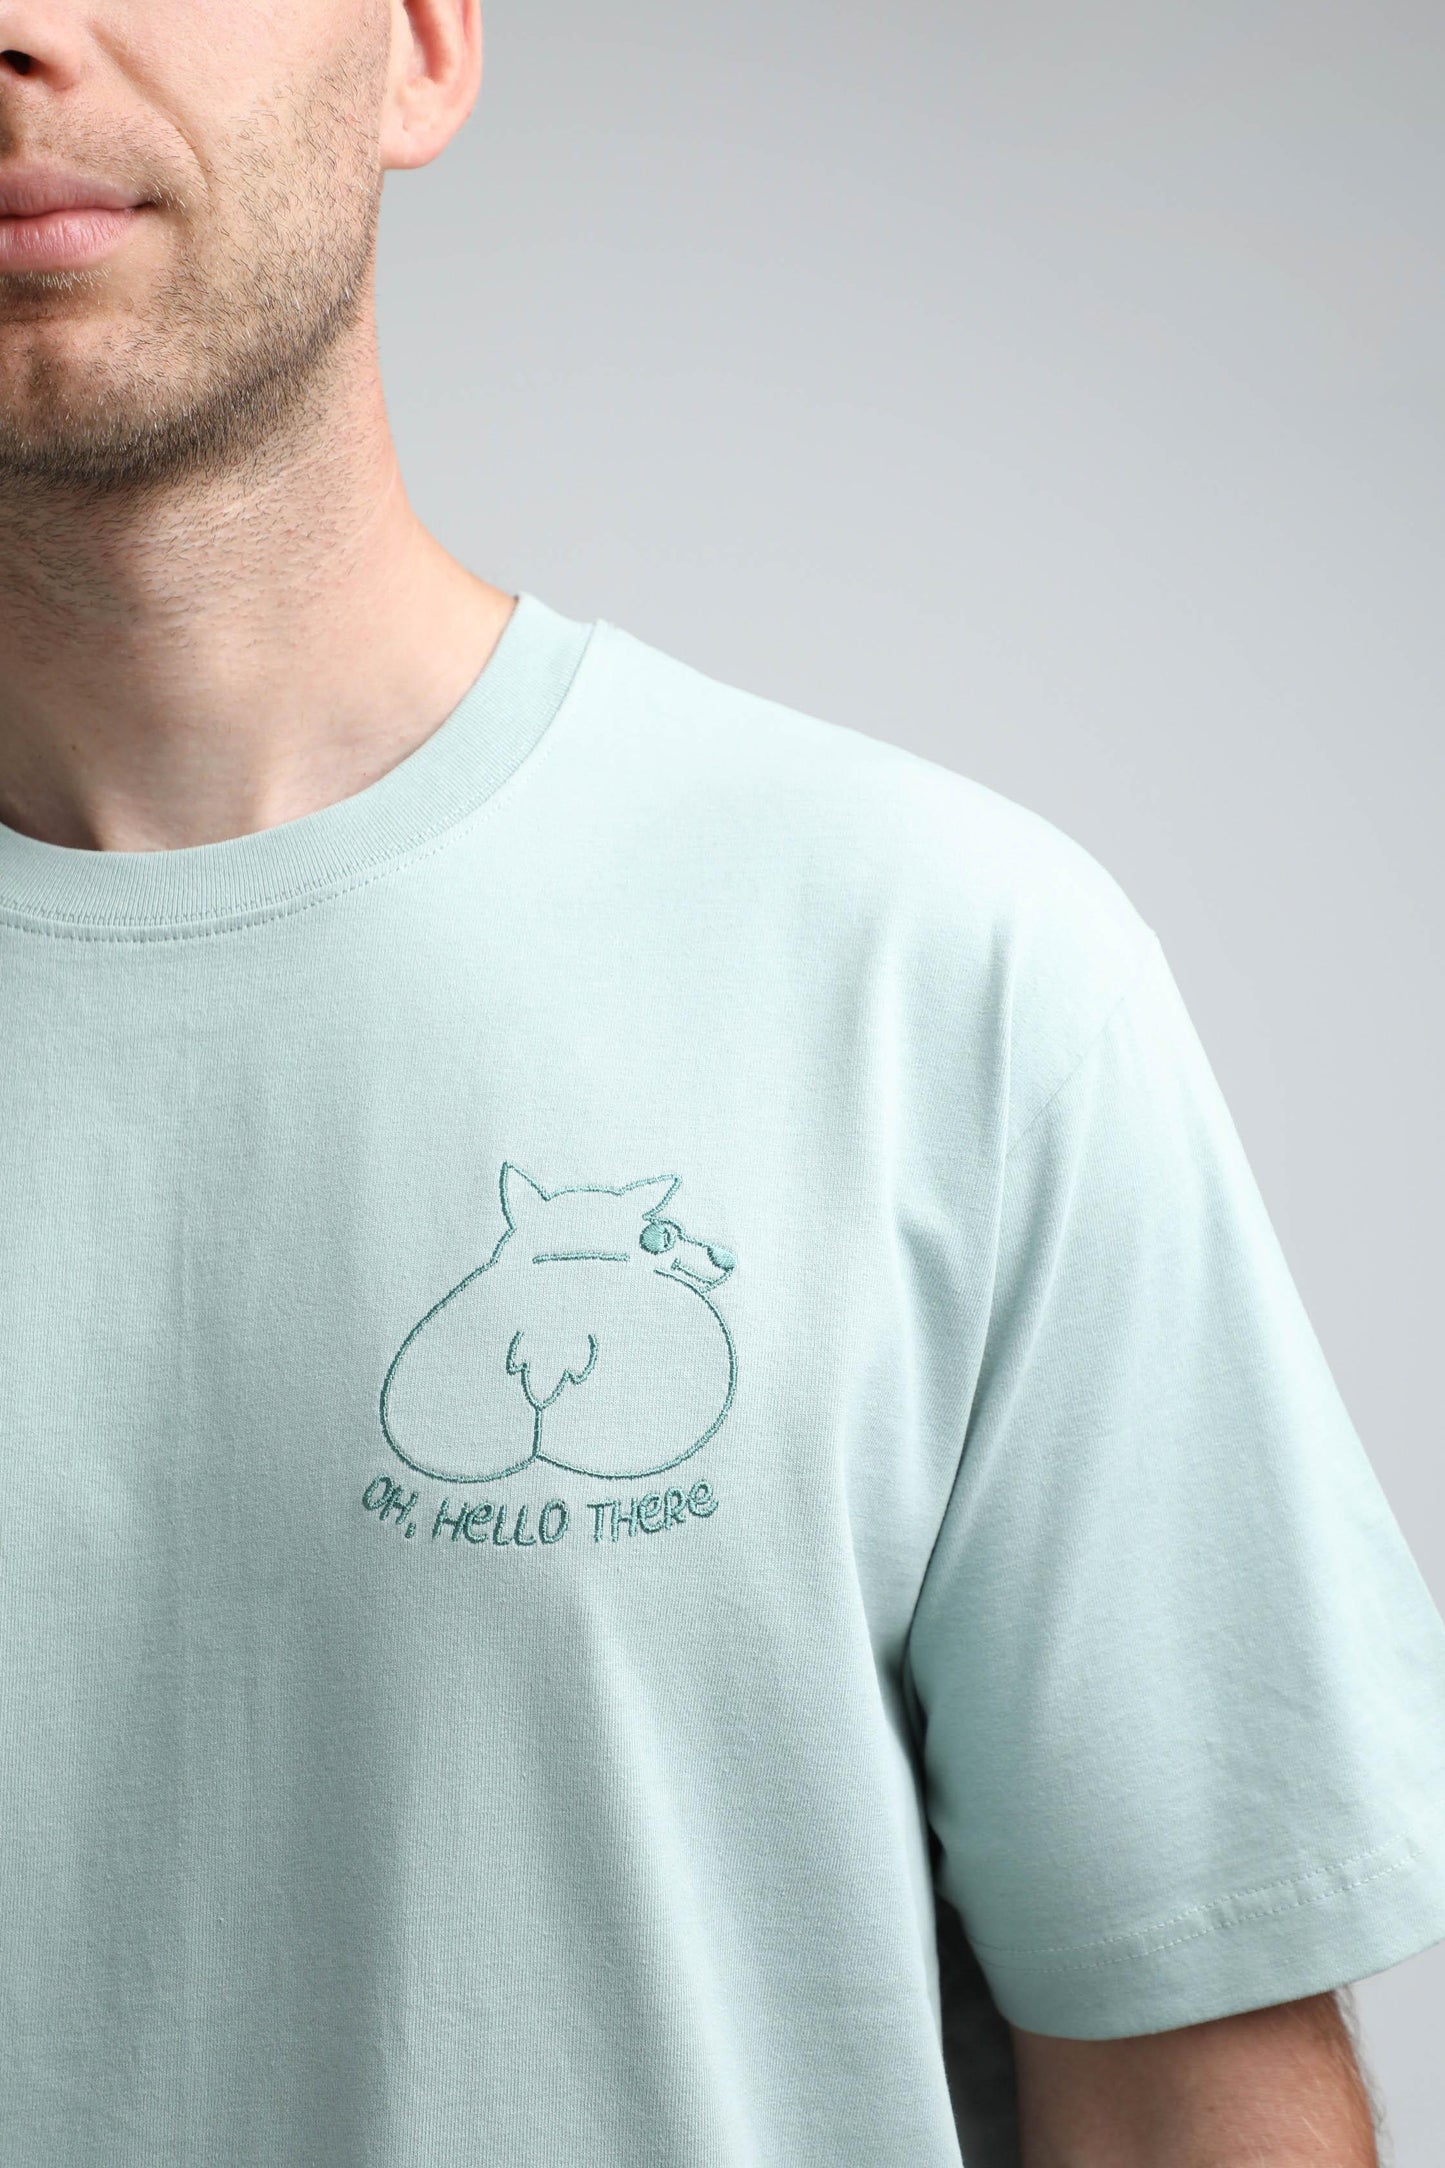 XL available only | Oh, hello there! | Heavyweight T-Shirt with embroidered dog. Oversized | Unisex - premium dog goods handmade in Europe by animalistus